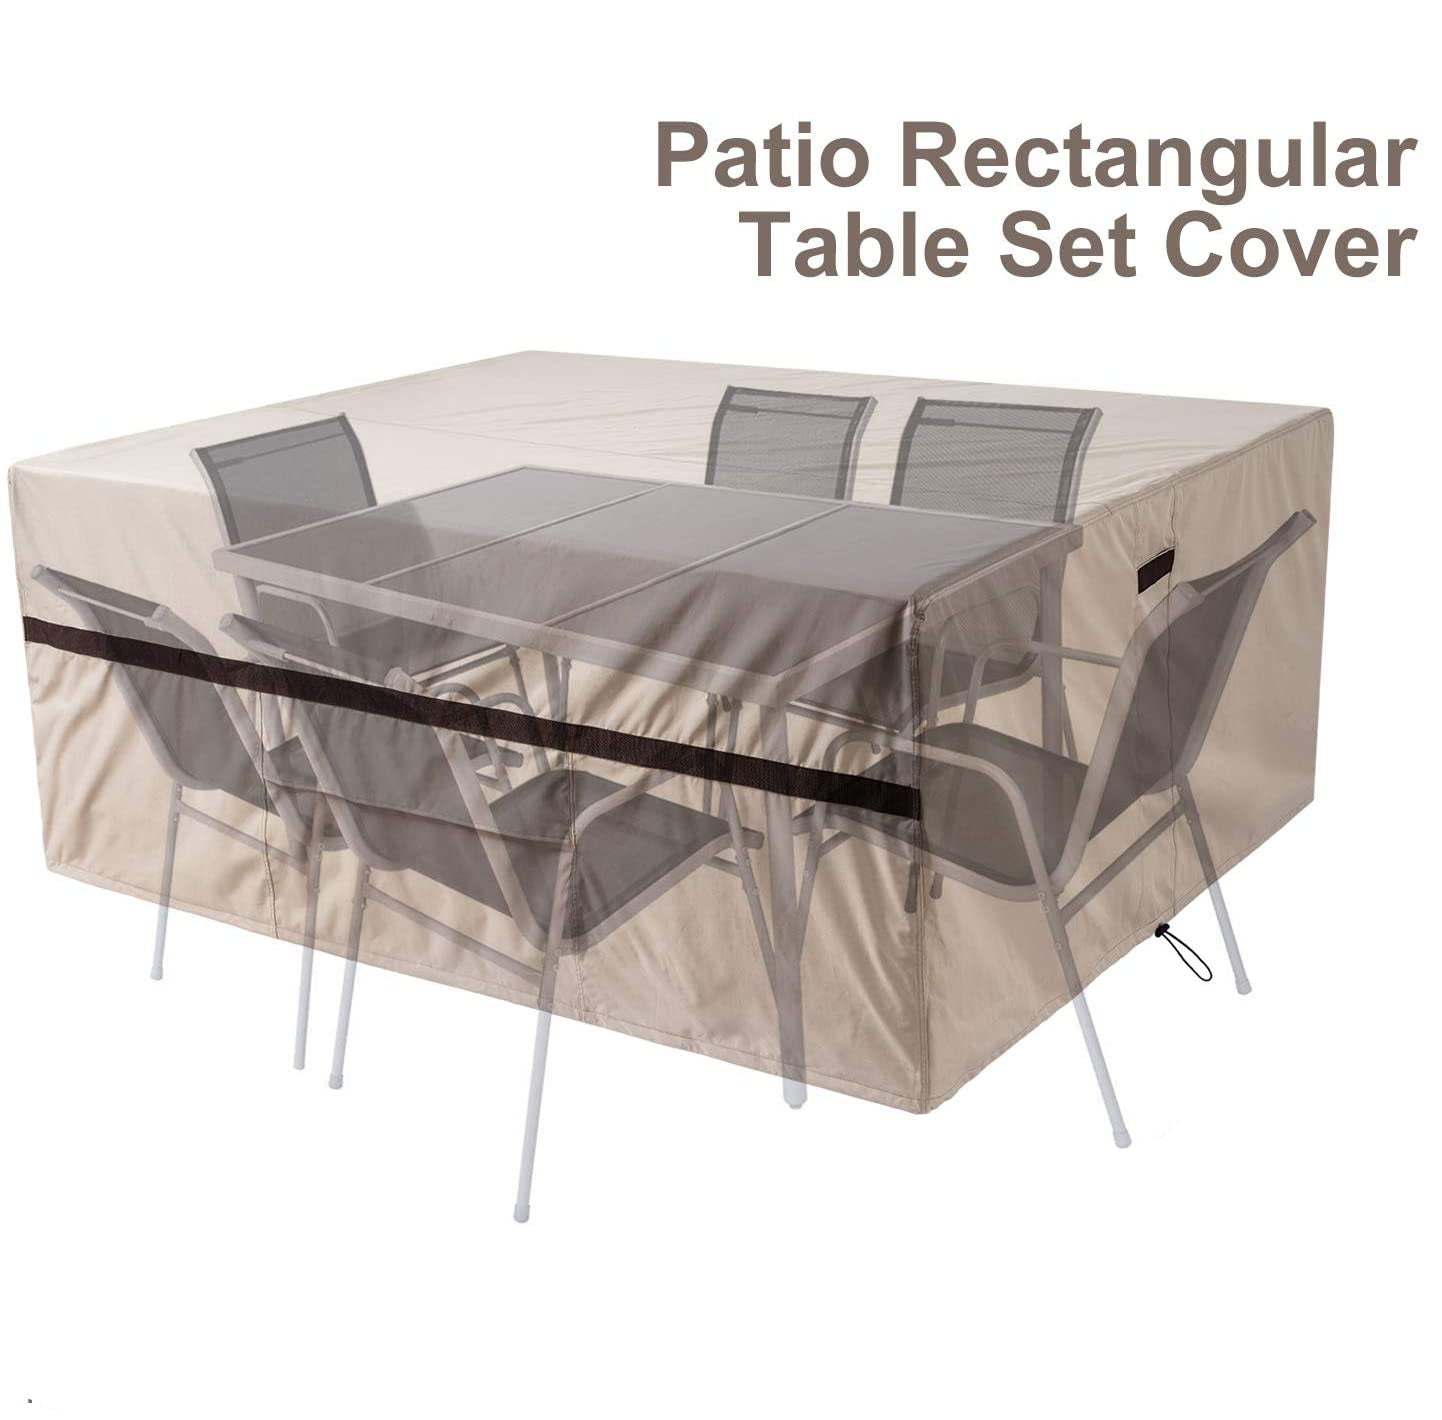 Rectangular Dining Table and Chair Set Covers